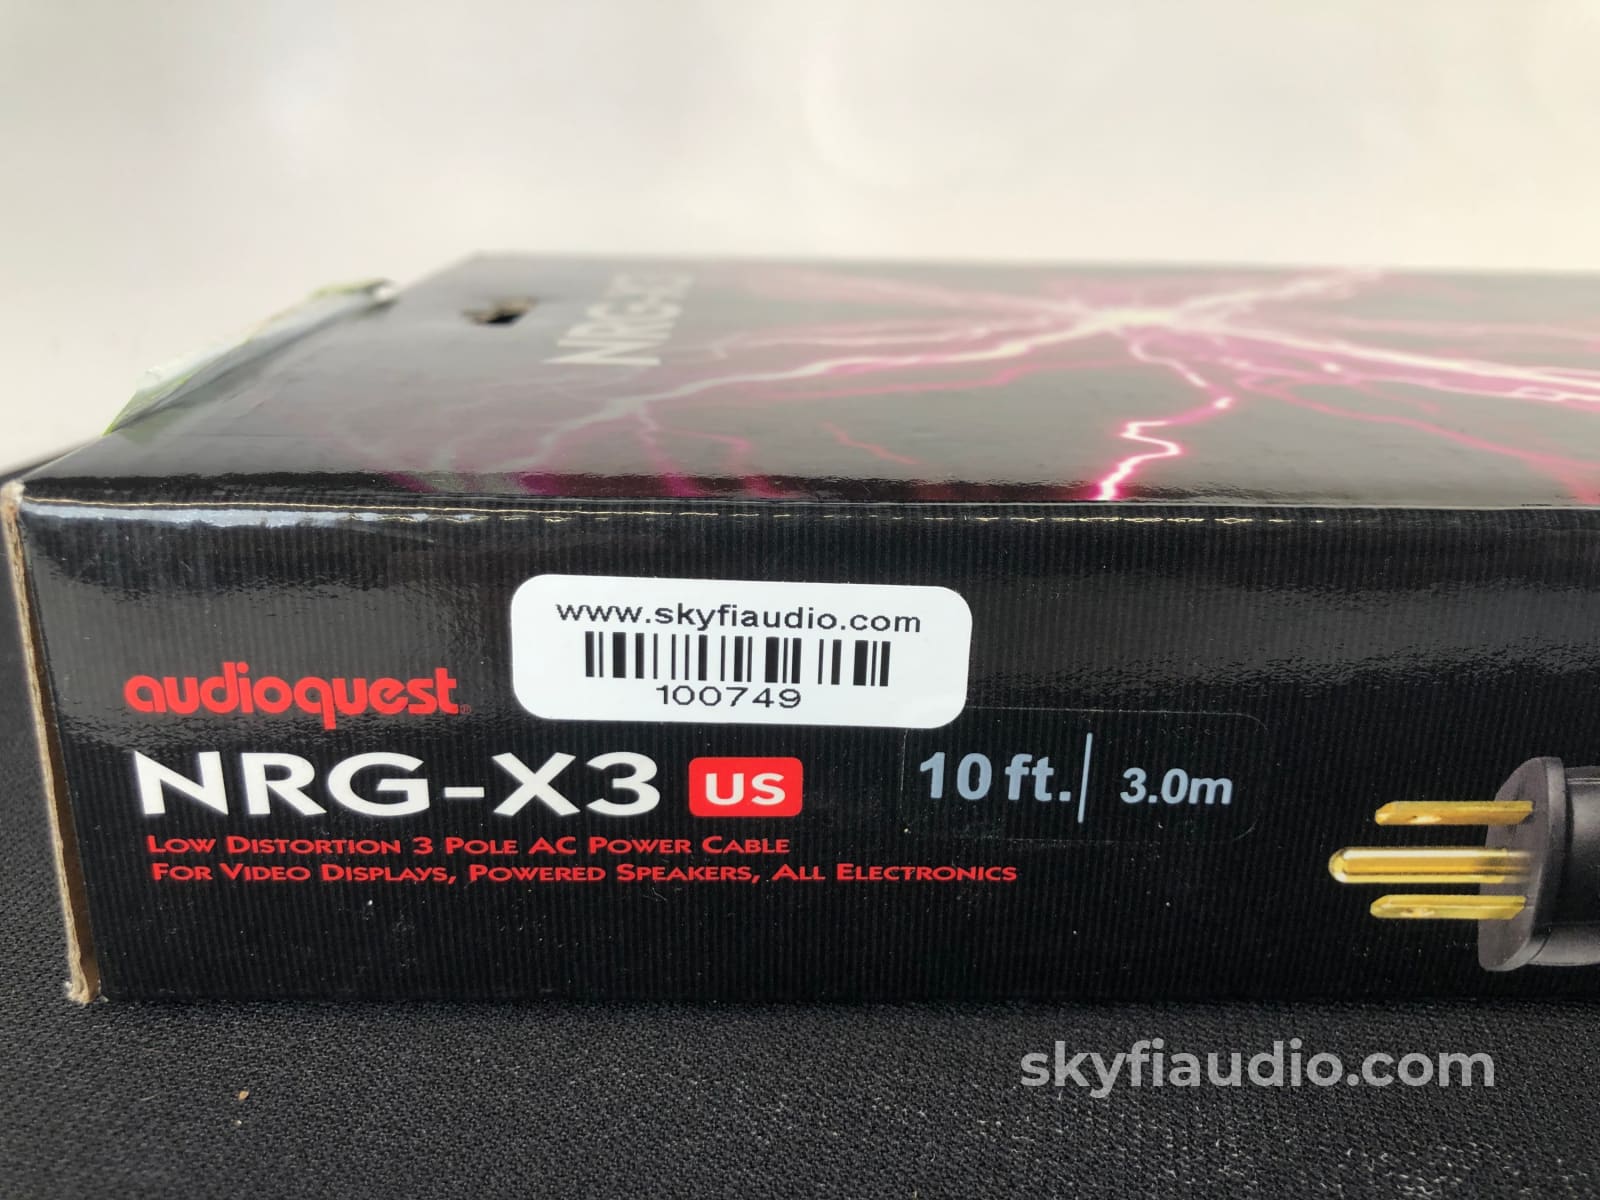 AudioQuest NRG Series - NRG-X3 Power Cable - New in Box - 10